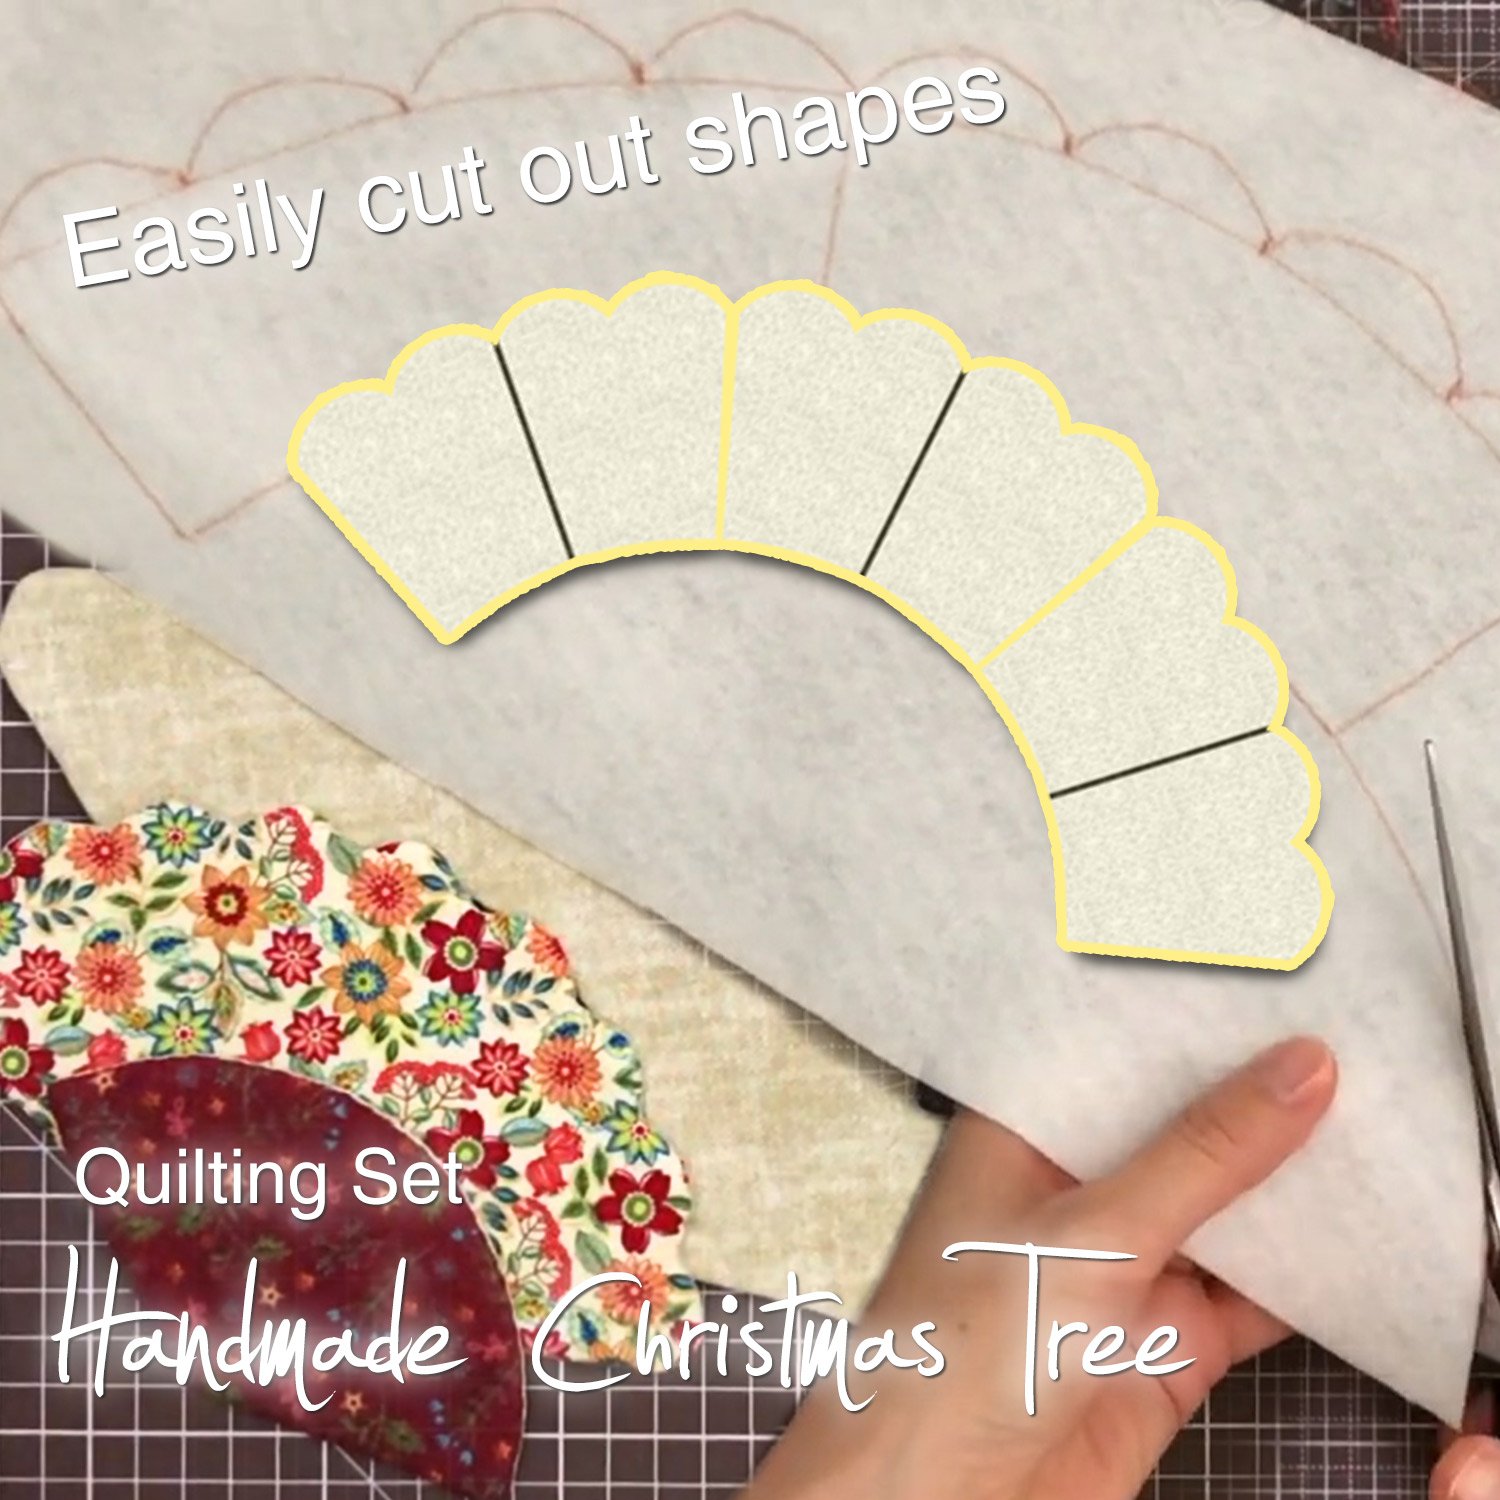 (🔥HOT SALE - 49% OFF) Handmade Christmas Tree Quilting Set (with tutorial)